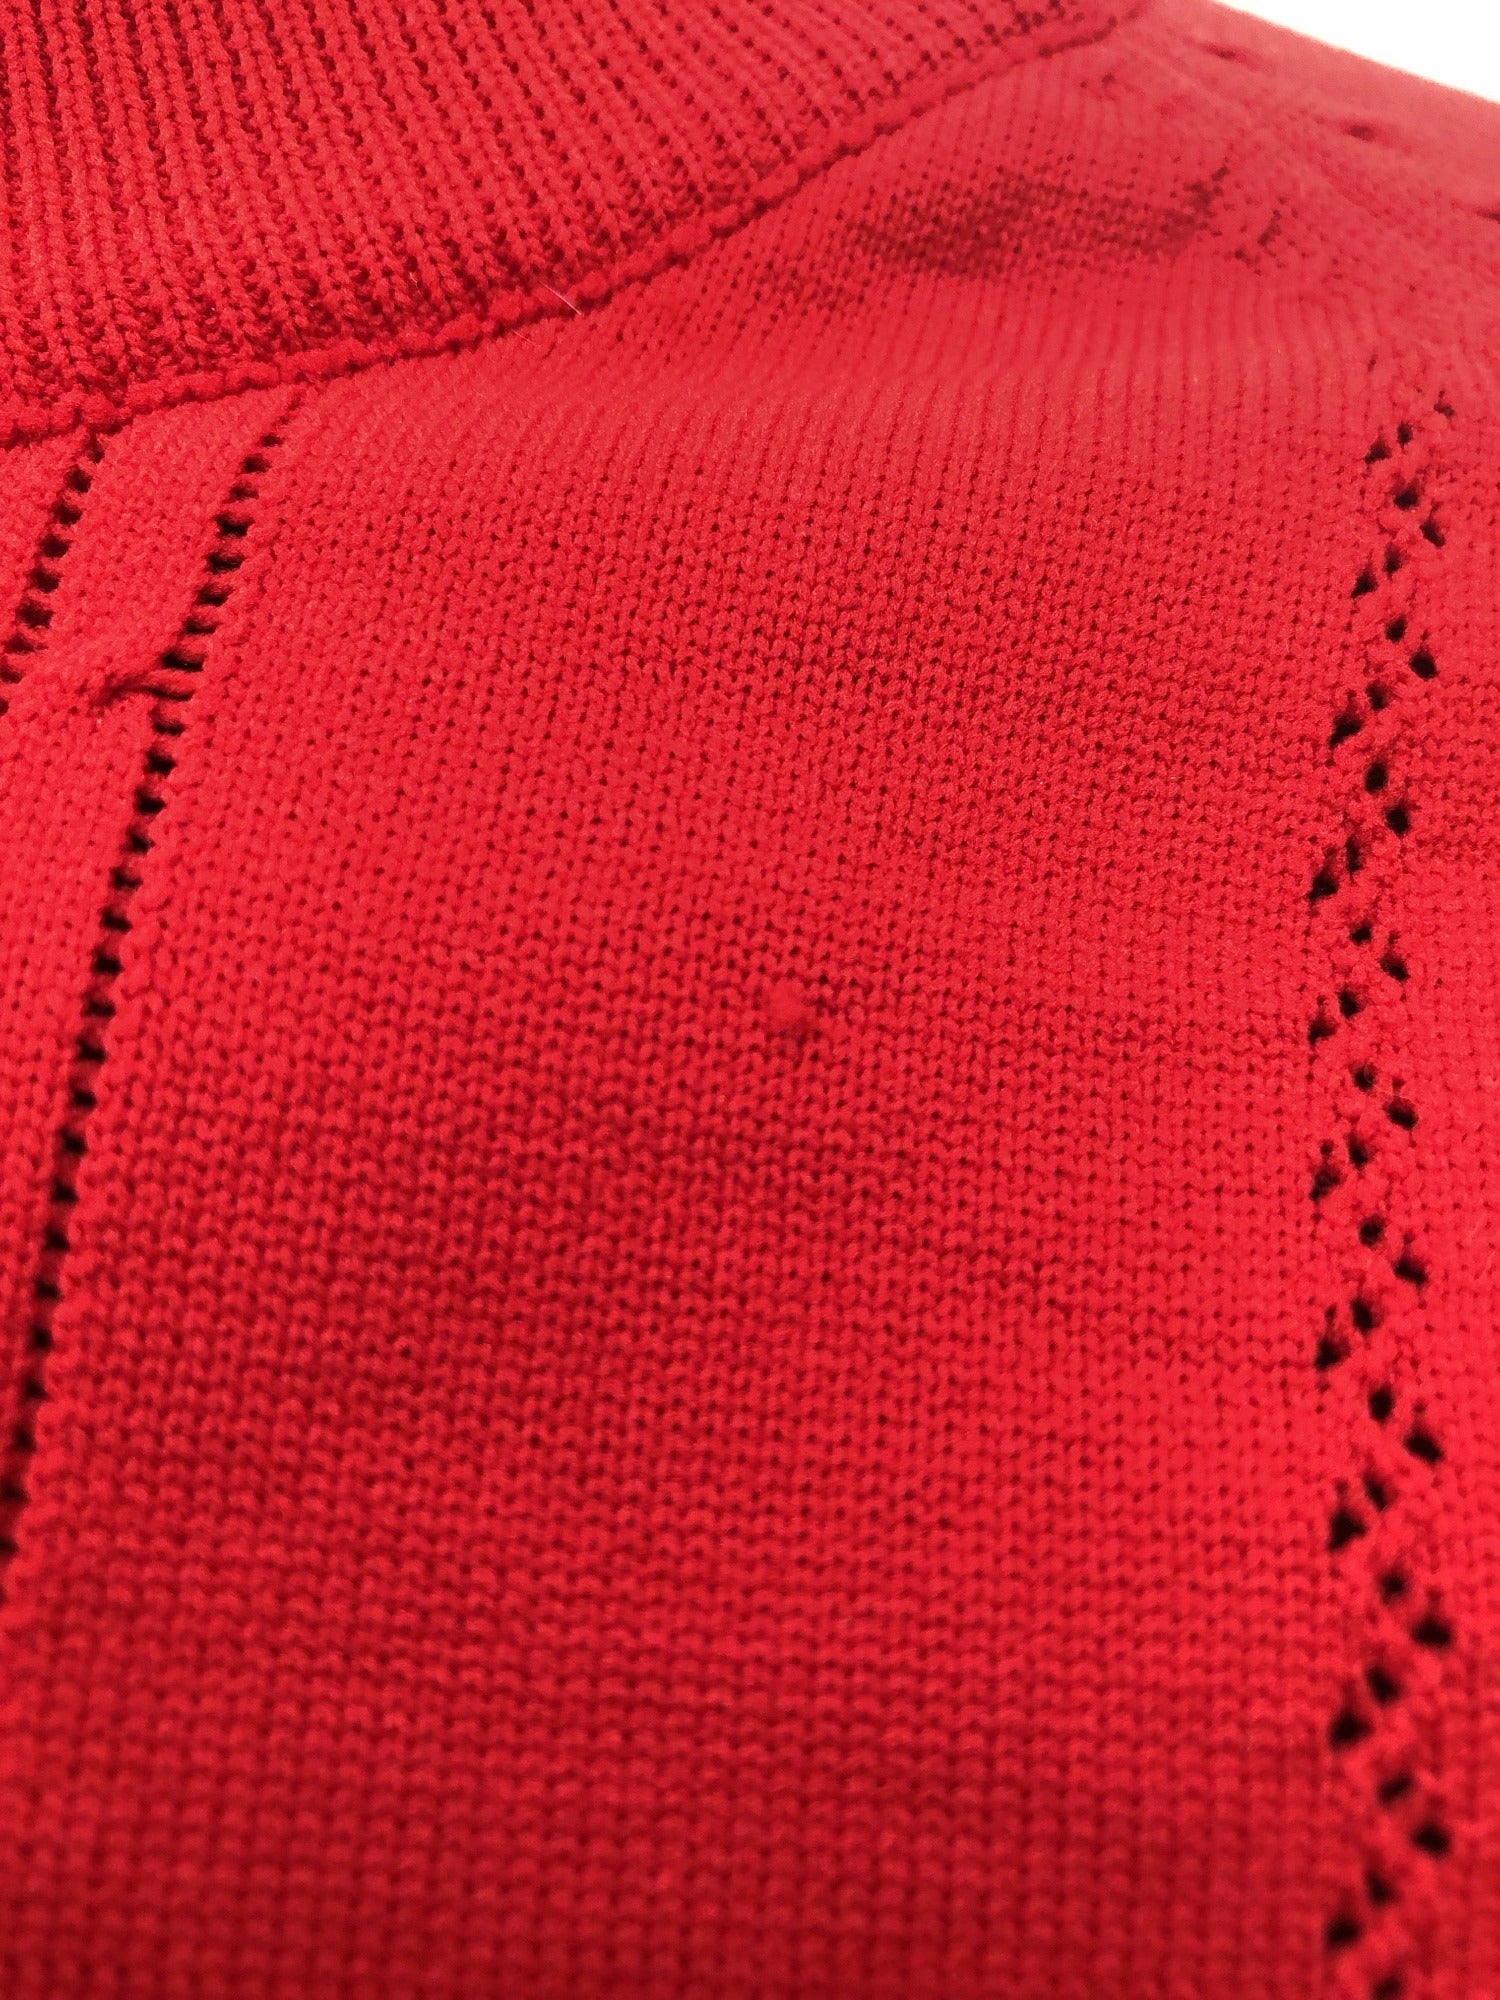 zip back  zip  womens  vintage  Urban Village Vintage  urban village  red  michelle quality garment  Long sleeved top  long sleeve  light knit  knitwear  knitted  knit  jumper  high neck  elasticated  crew neck  60s  1960s  16